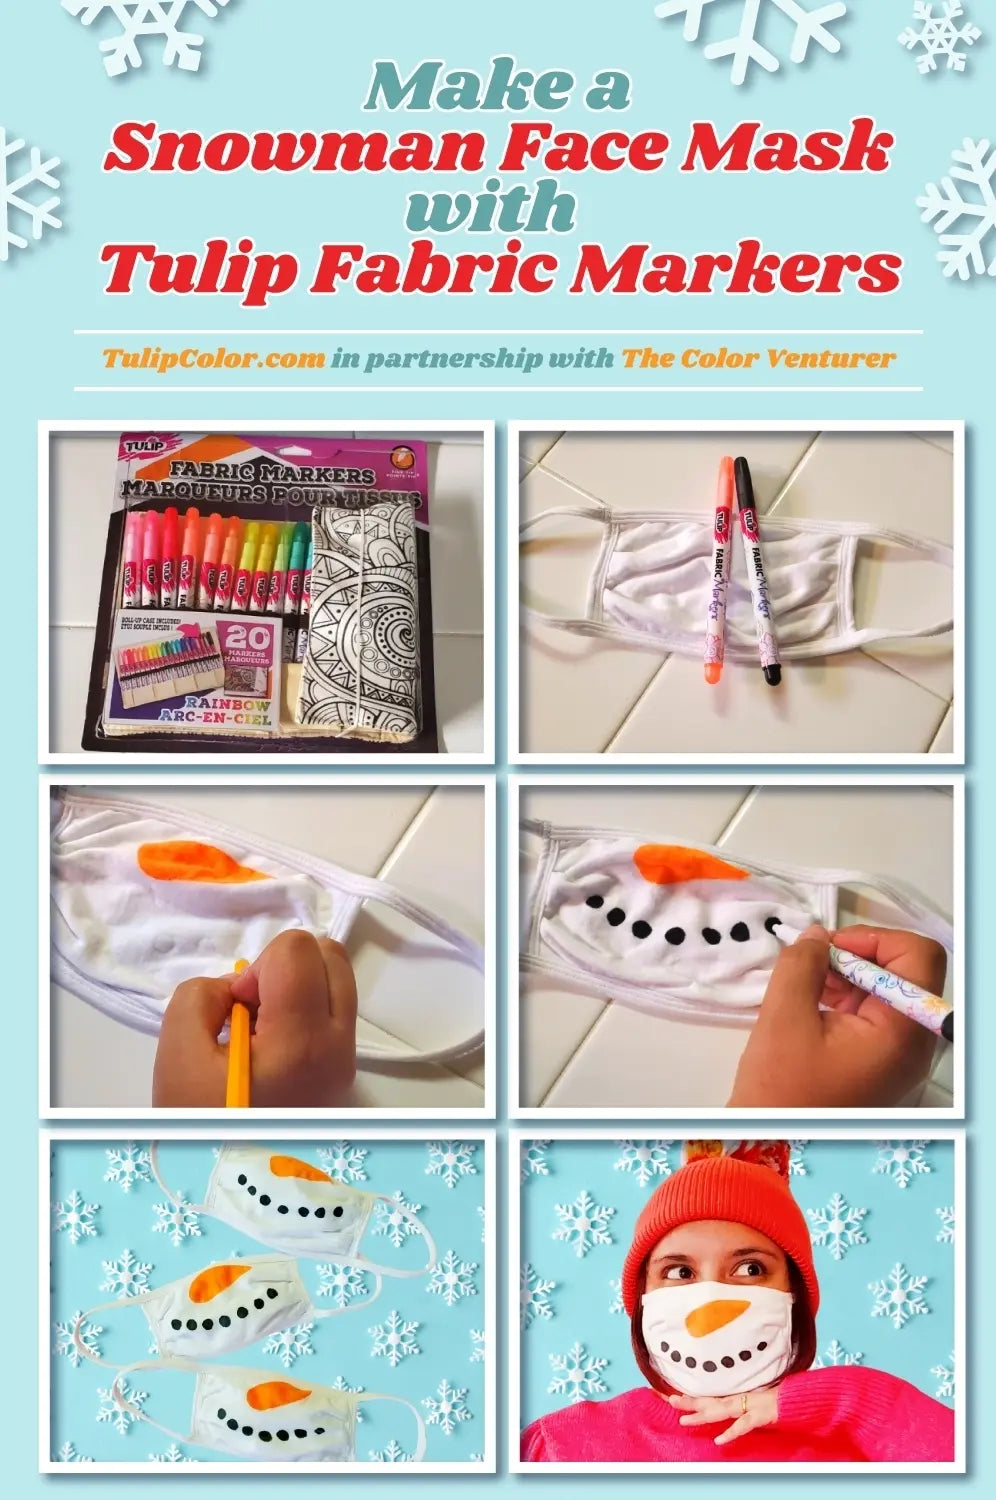 Make a Snowman Face Mask with Fabric Markers